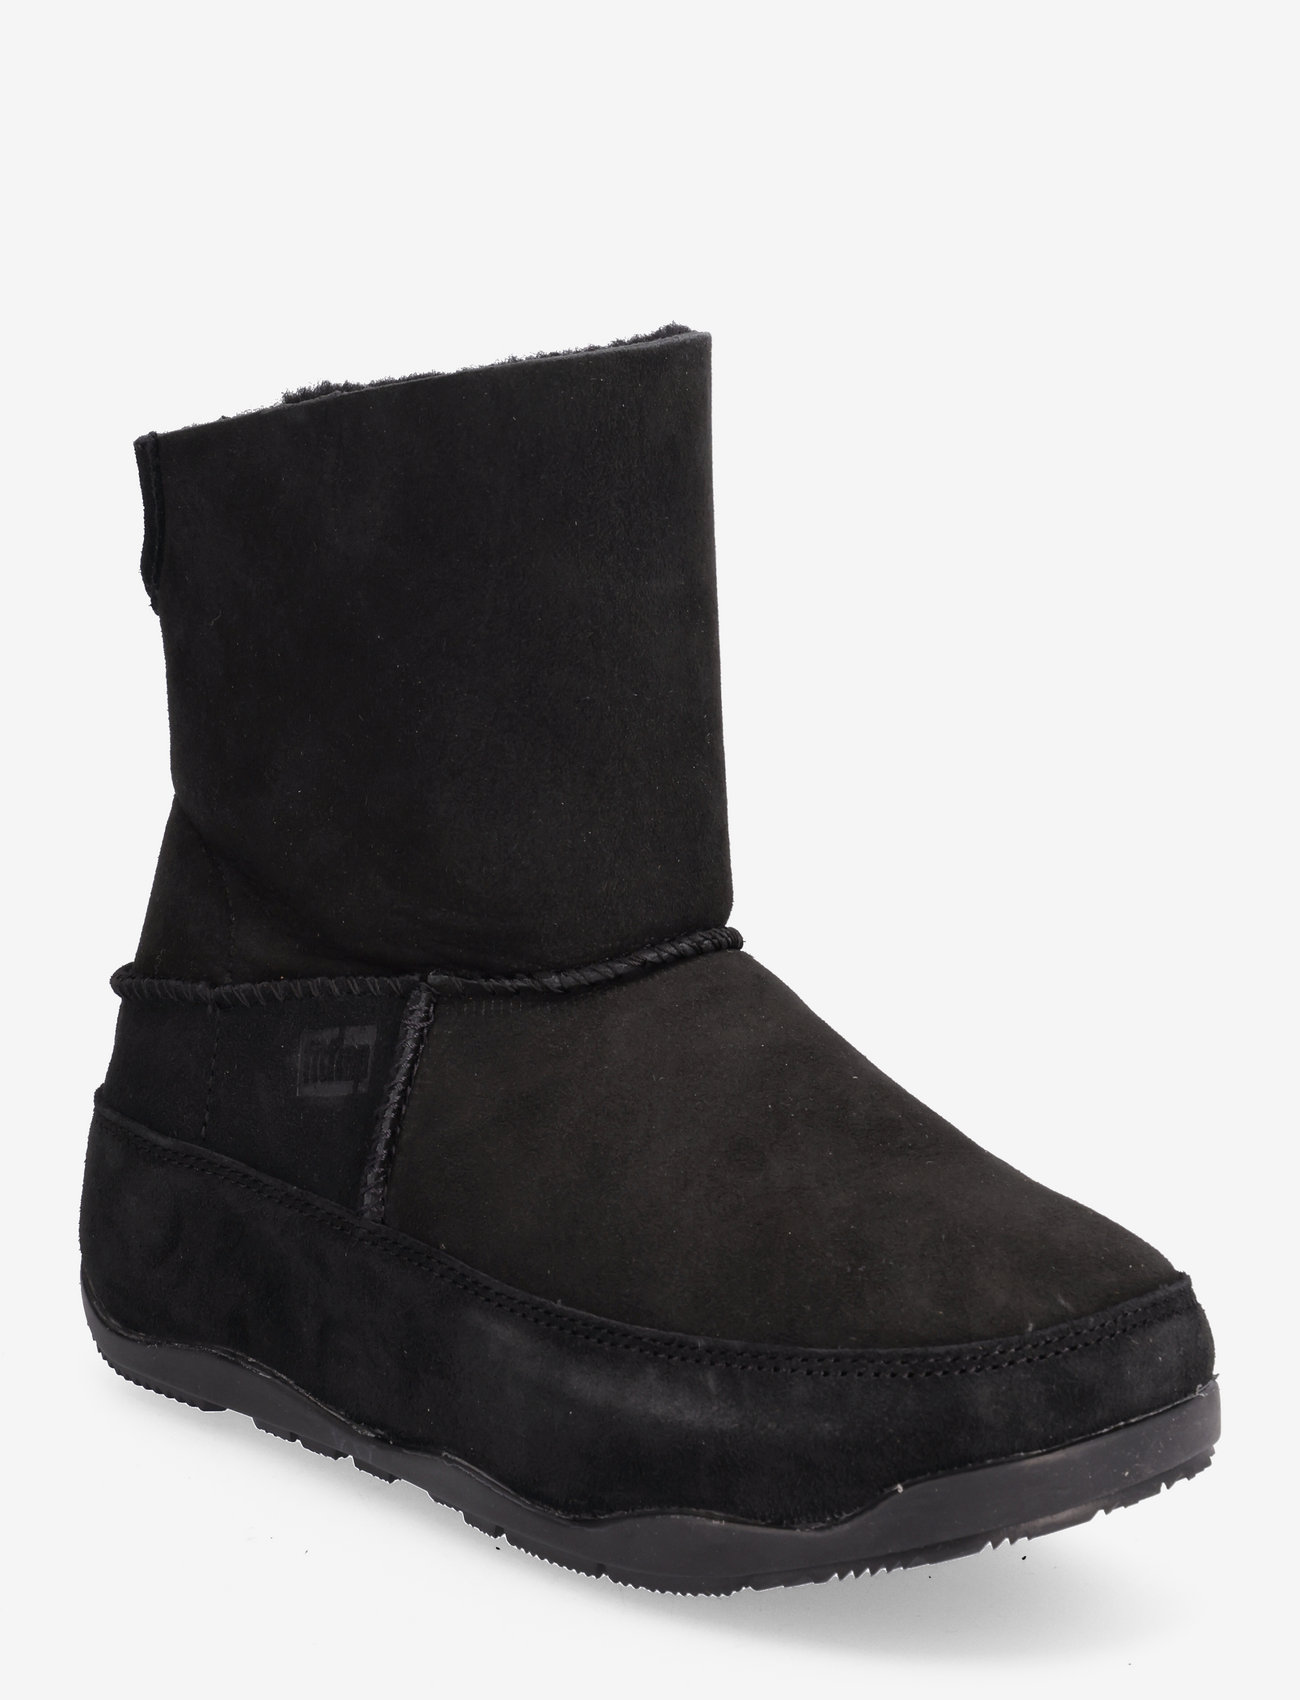 FitFlop Original Mukluk Shorty Double-face Shearling Boots (All Black ...